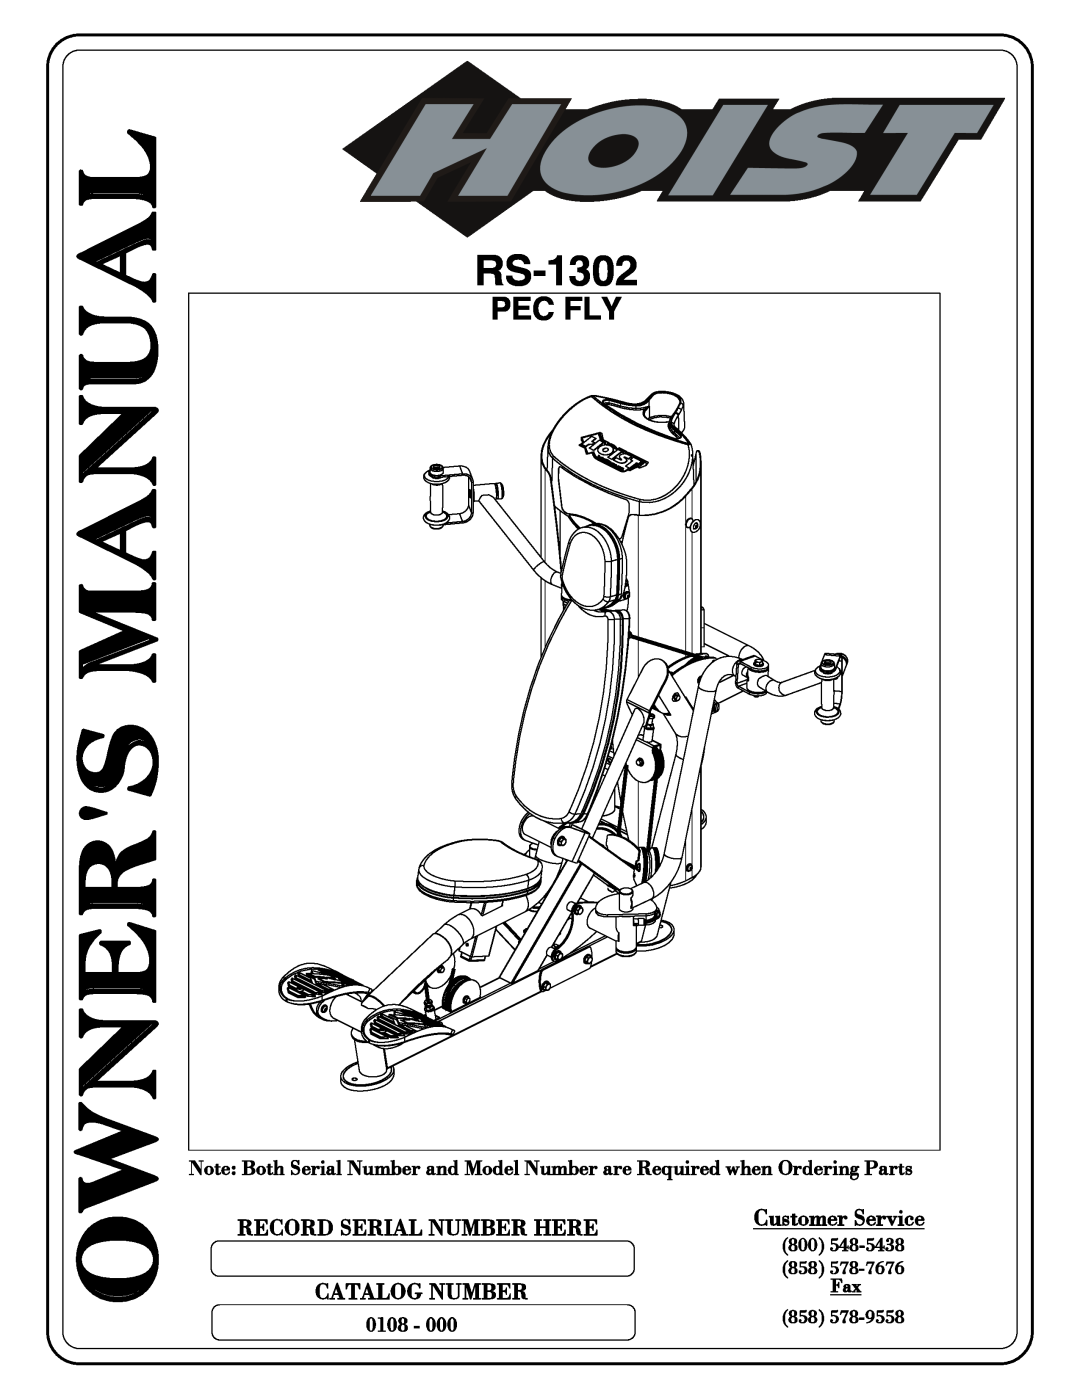 Hoist Fitness RS-1302 owner manual Pec Fly, Owners Manual, Record Serial Number Here, Catalog Number, Customer Service 